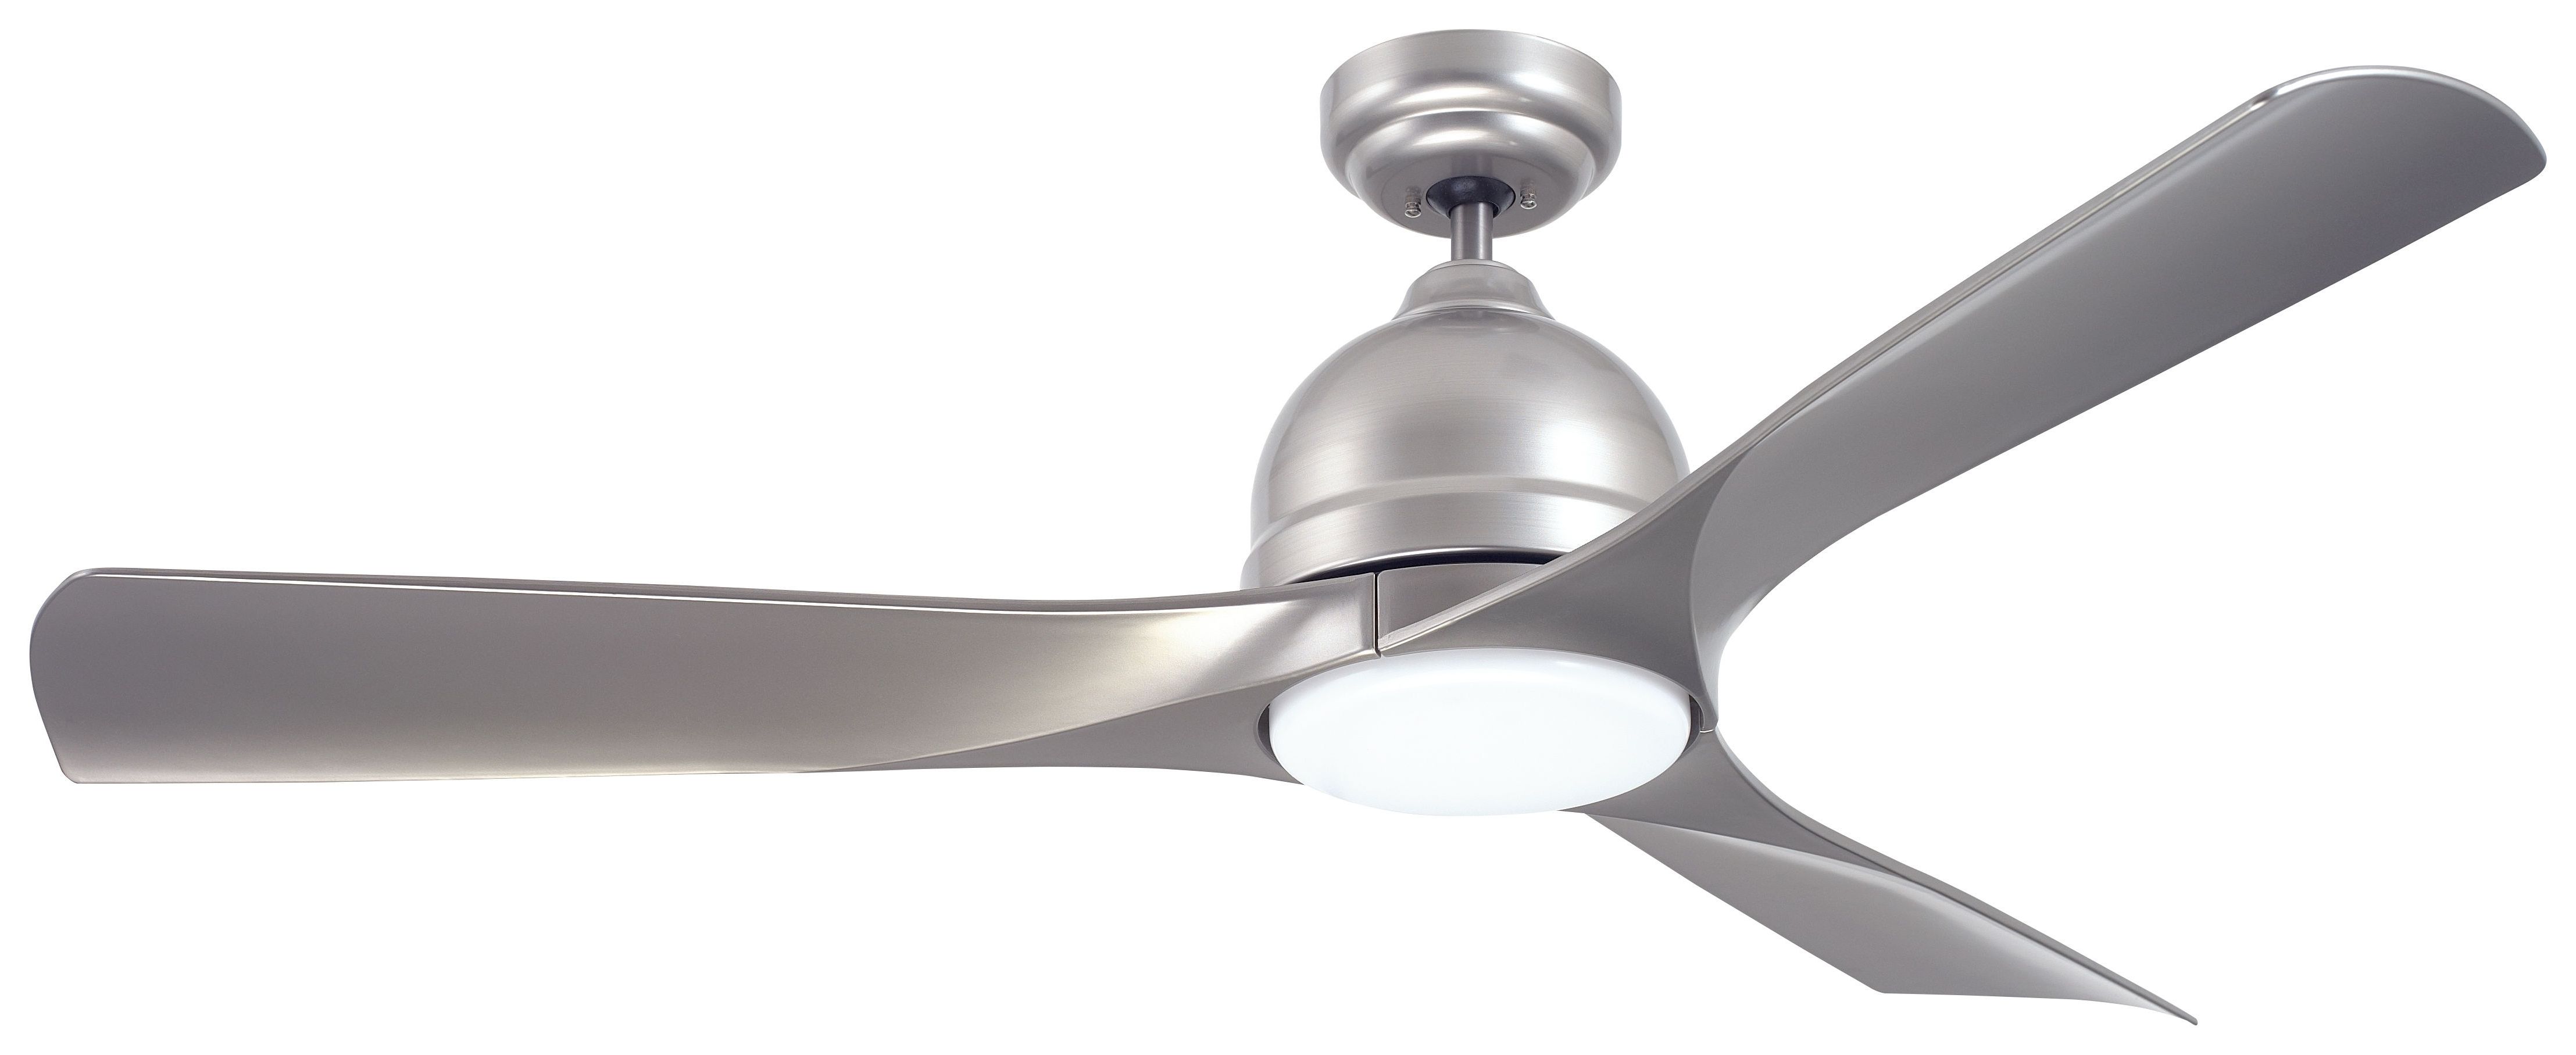 2019 Wet Rated Emerson Outdoor Ceiling Fans Throughout Emerson Cf590pt Platinum Volta 54" 3 Blade Indoor/outdoor Ceiling (View 11 of 20)